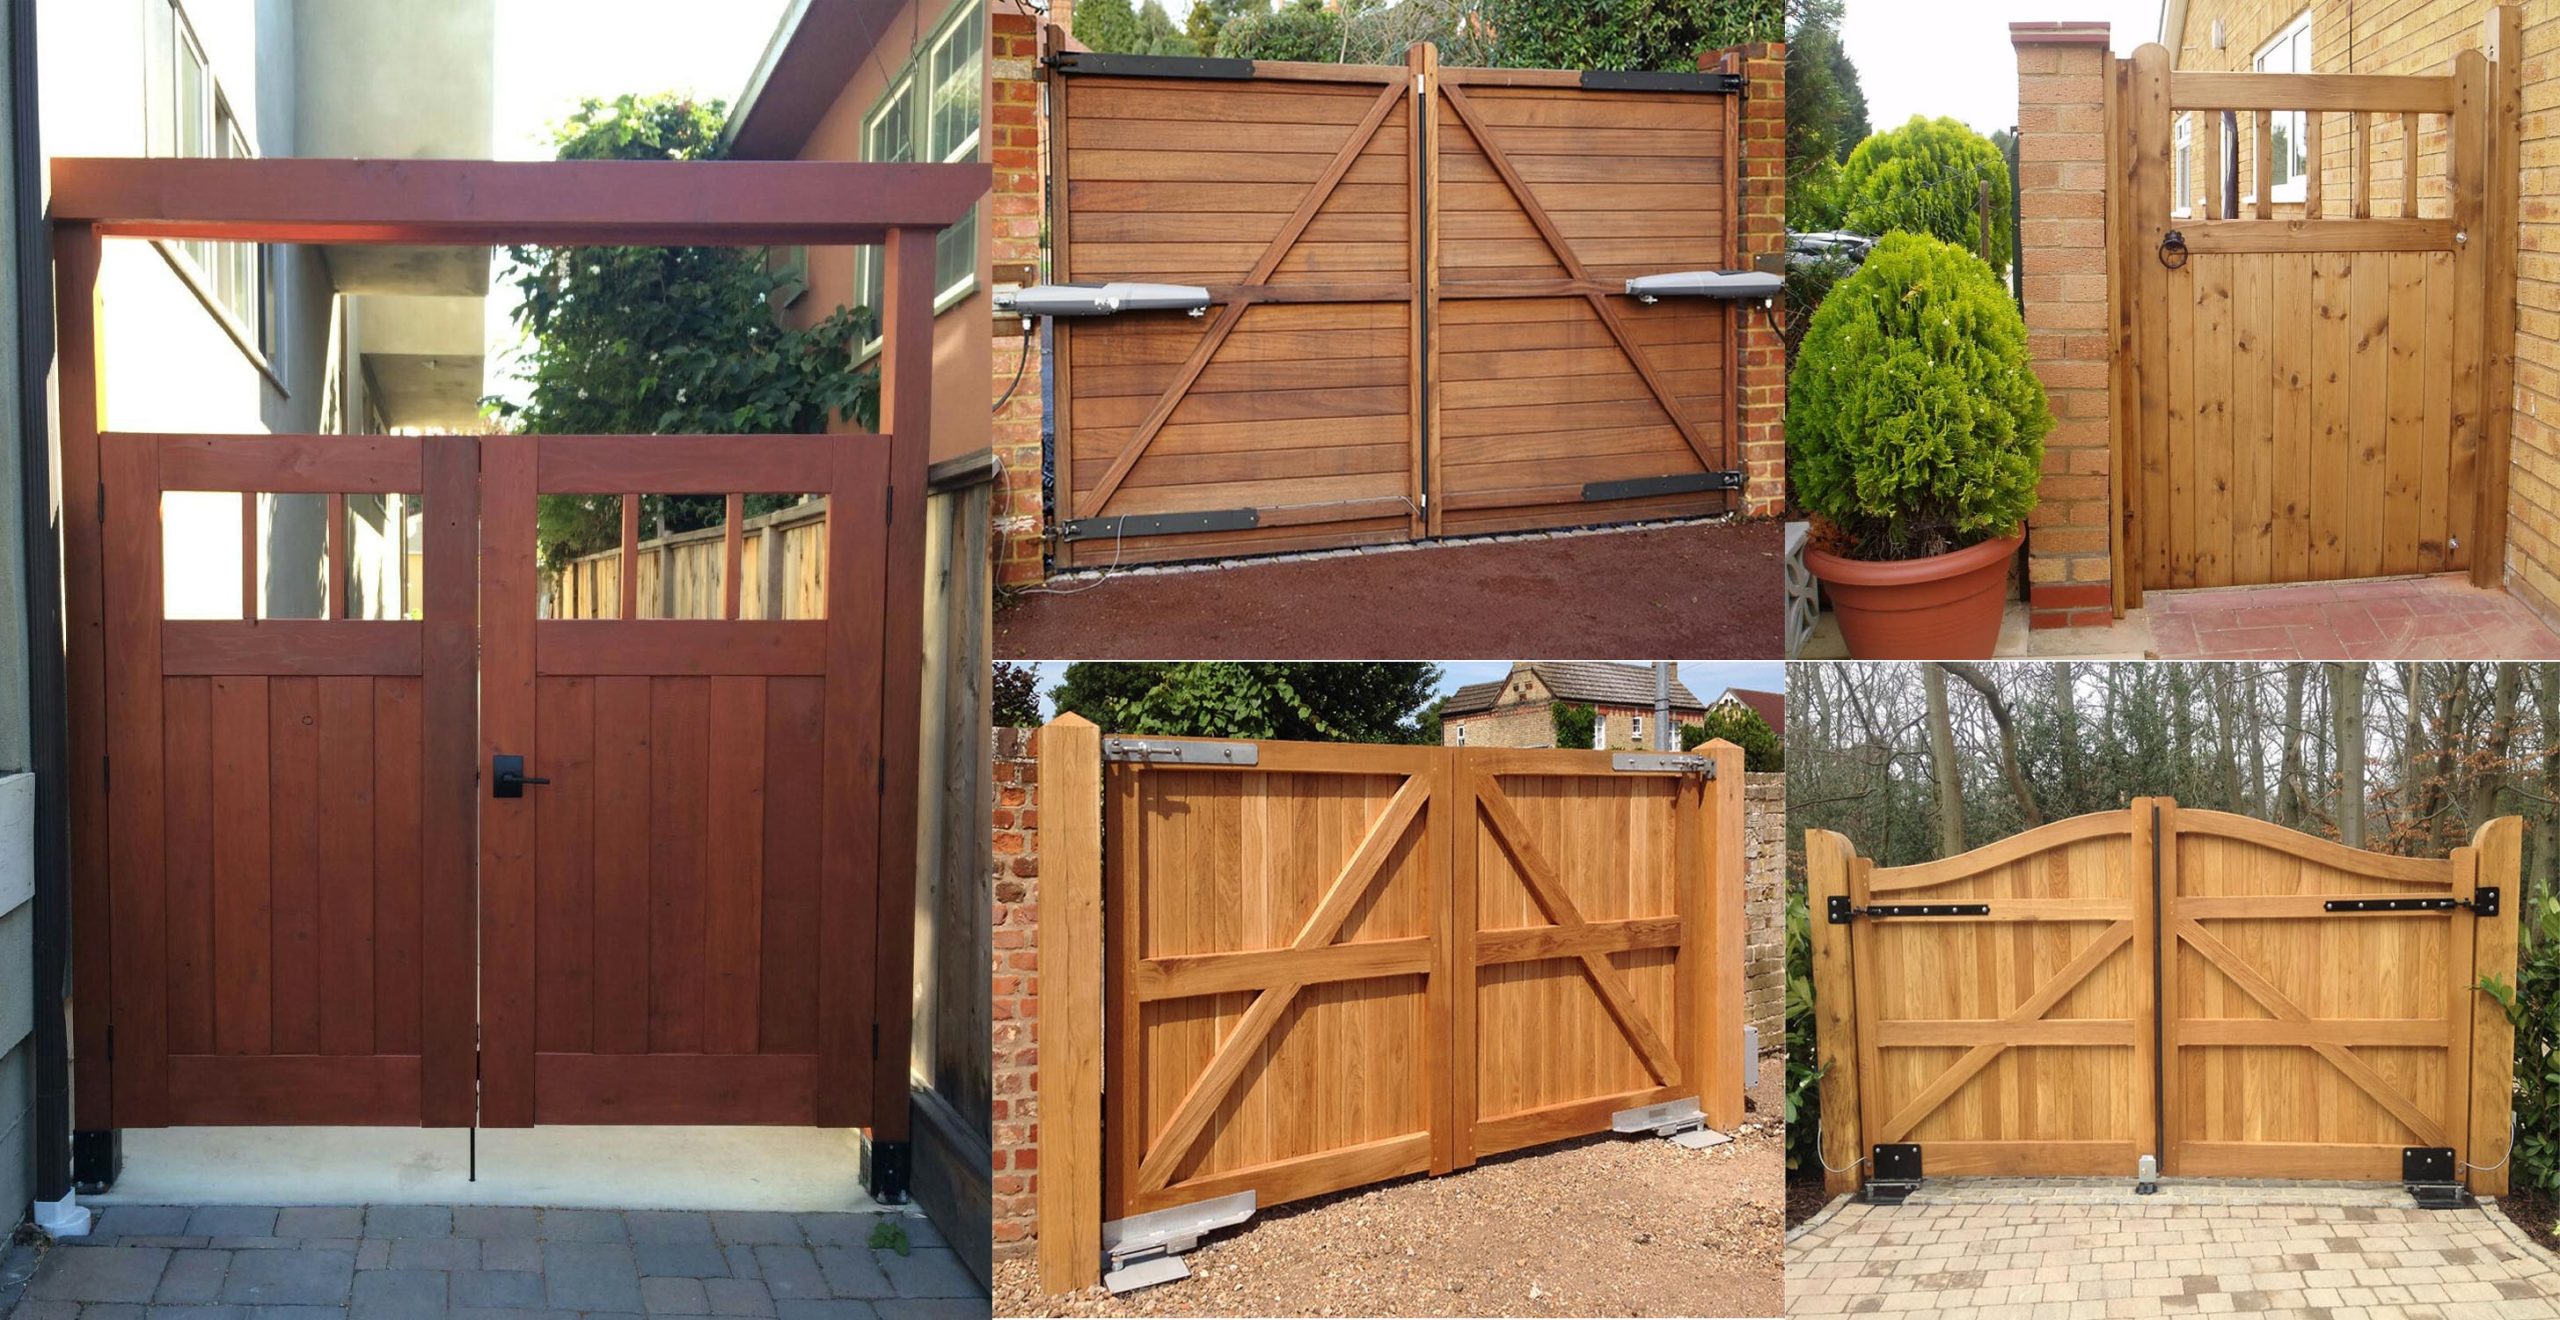 35 Amazing Wooden Gate Ideas - Engineering Discoveries